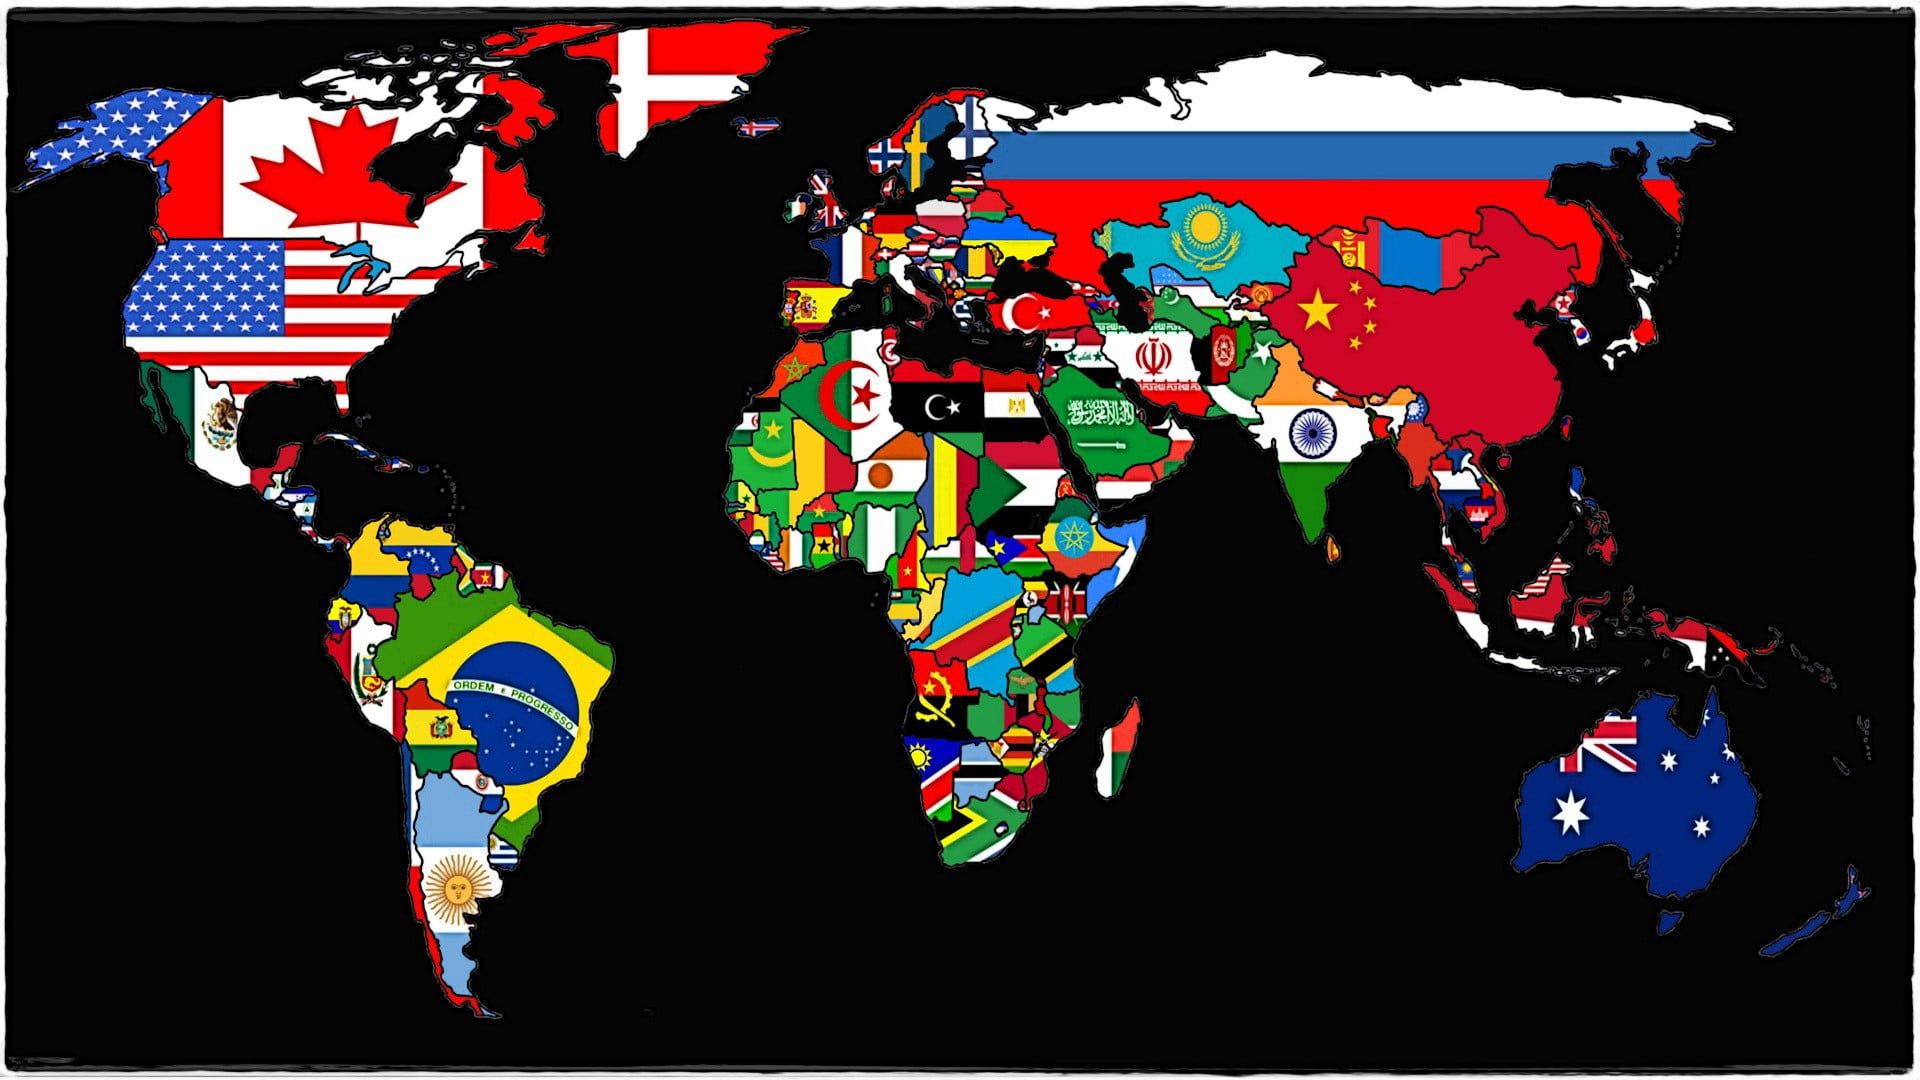 world map with flags on its country illustration #map #world #flag #nations world map P #wallpaper #hdwall. World map wallpaper, Illustrated map, Map artwork